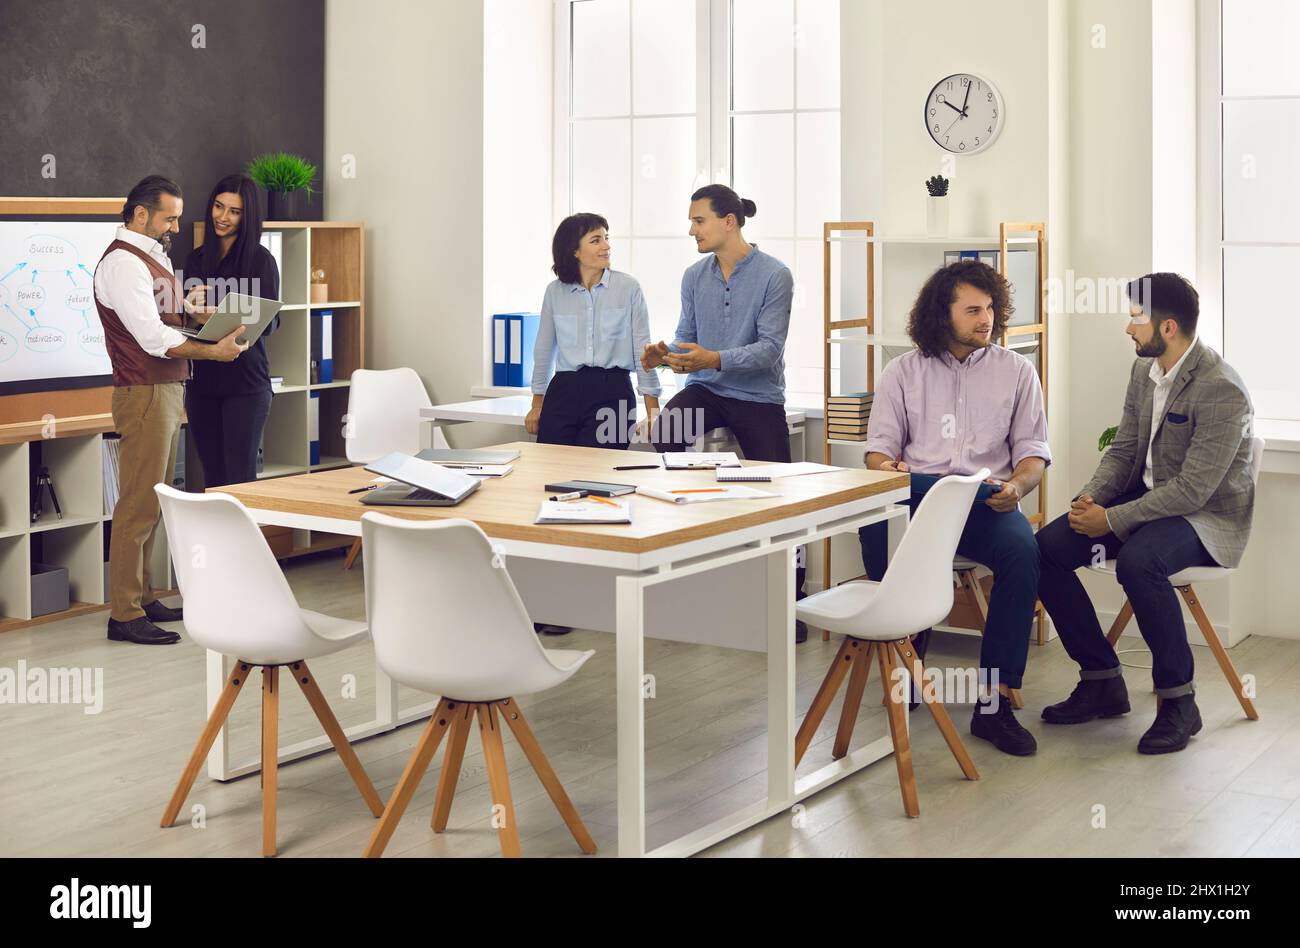 Business people or company employees meet up and work together in a modern office Stock Photo